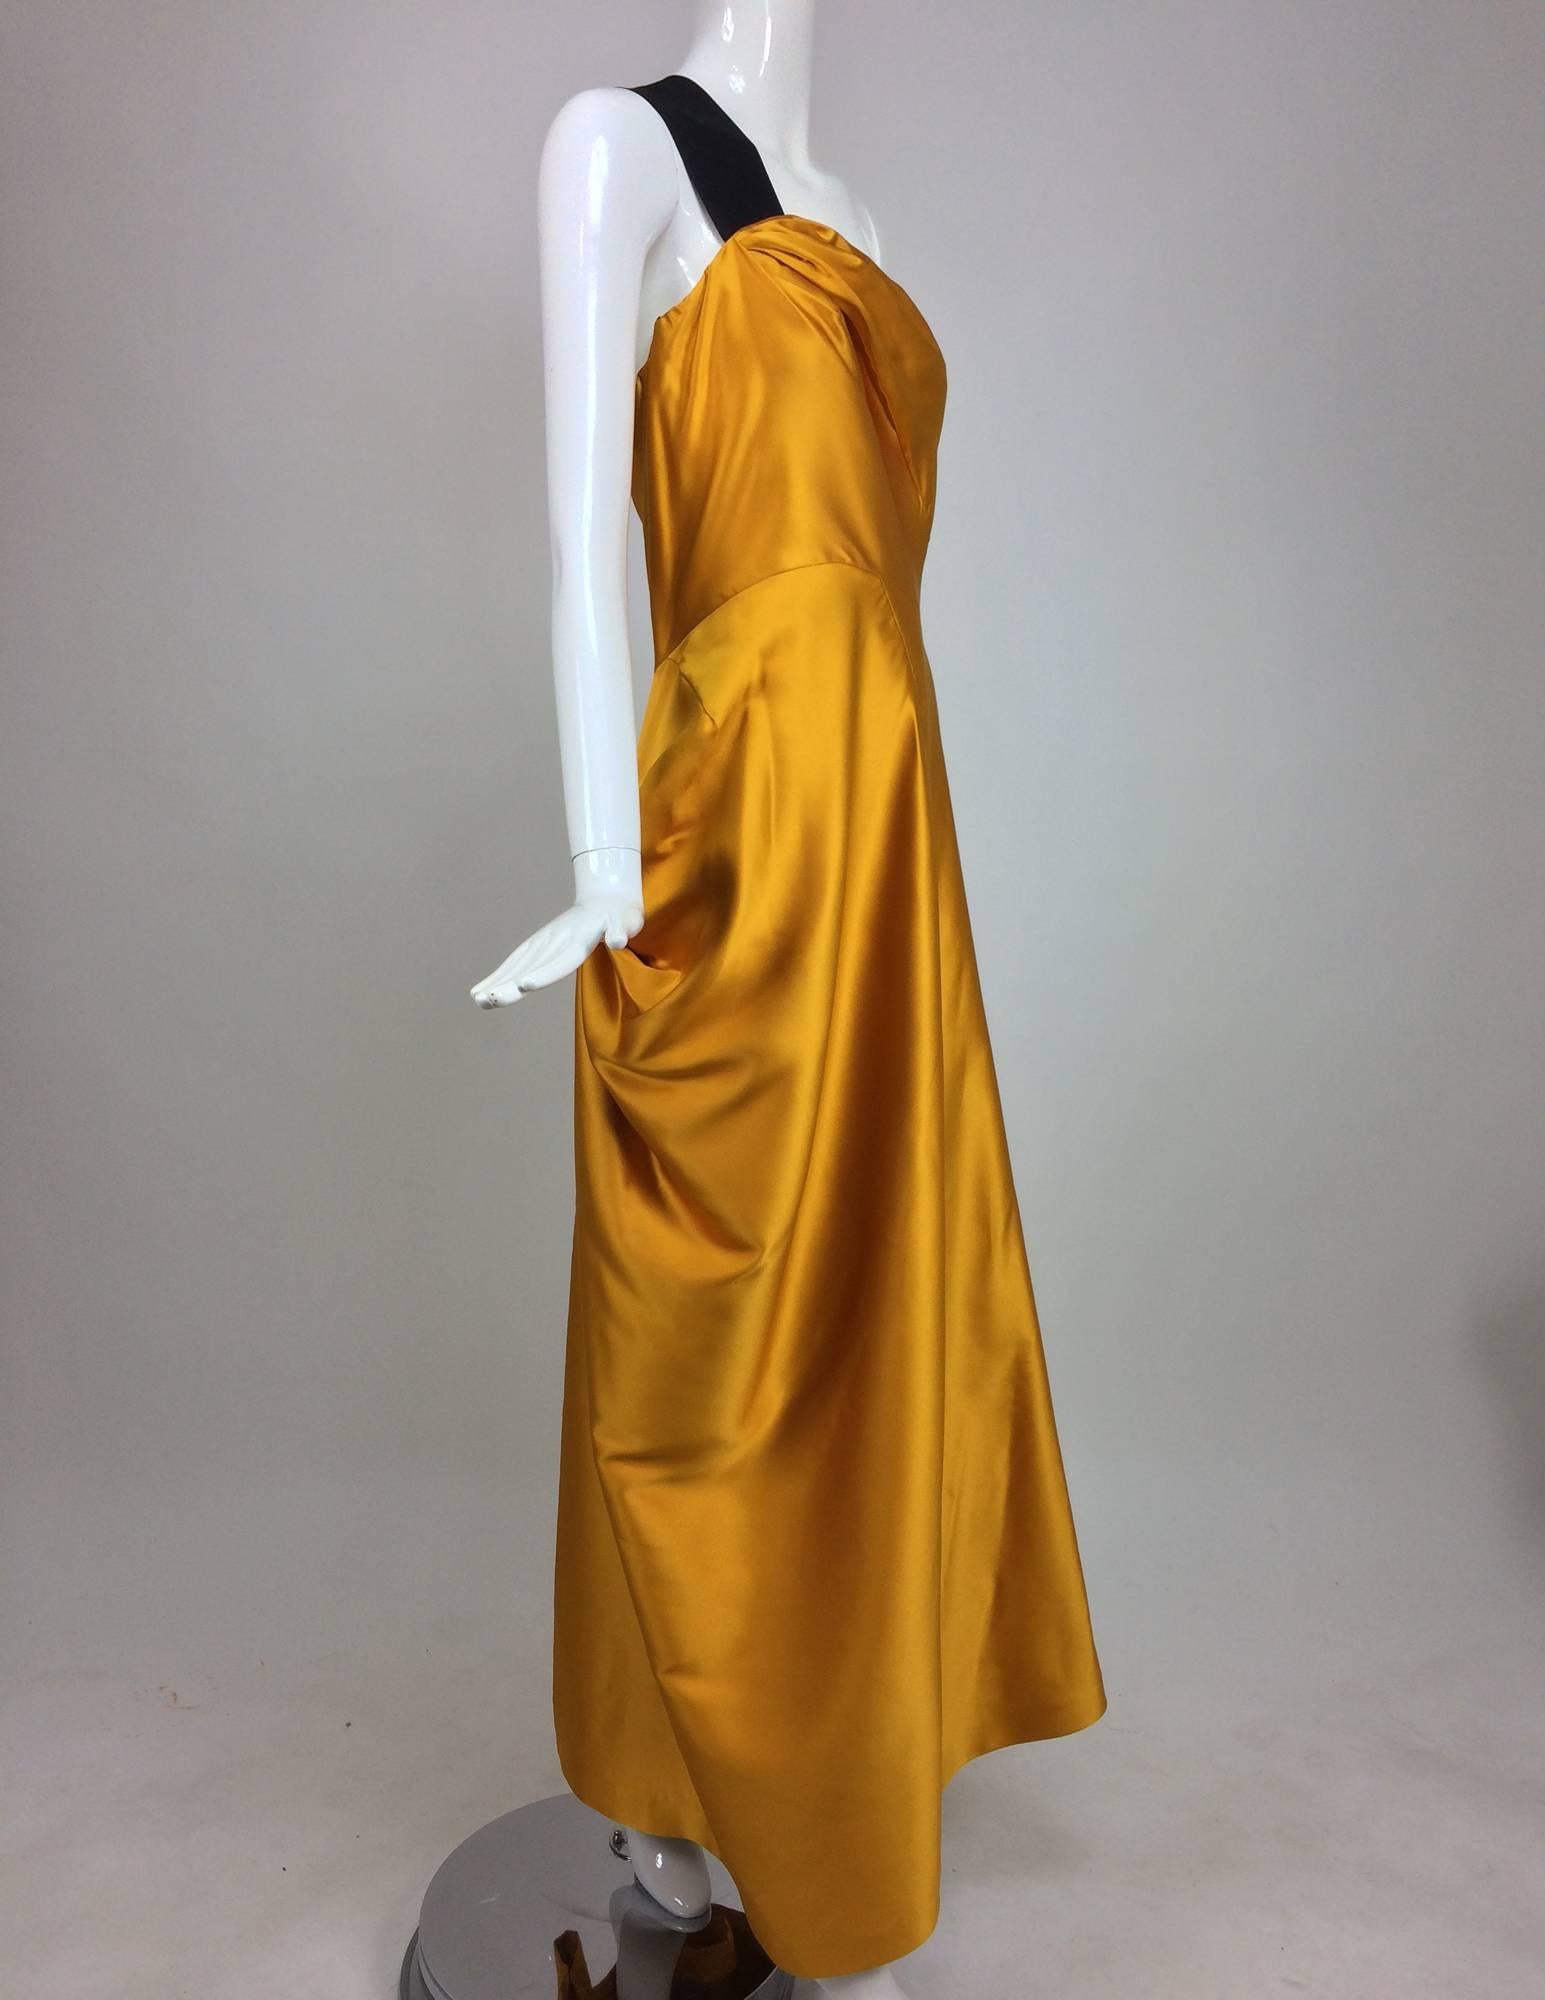 Dries Van Noten saffron silk one shoulder evening gown SS 2009...Beautiful saffron silk satin gown with a single wide black silk ribbon shoulder strap...The dress bodice is draped on one side...Seamed waist with side drape on one side and open